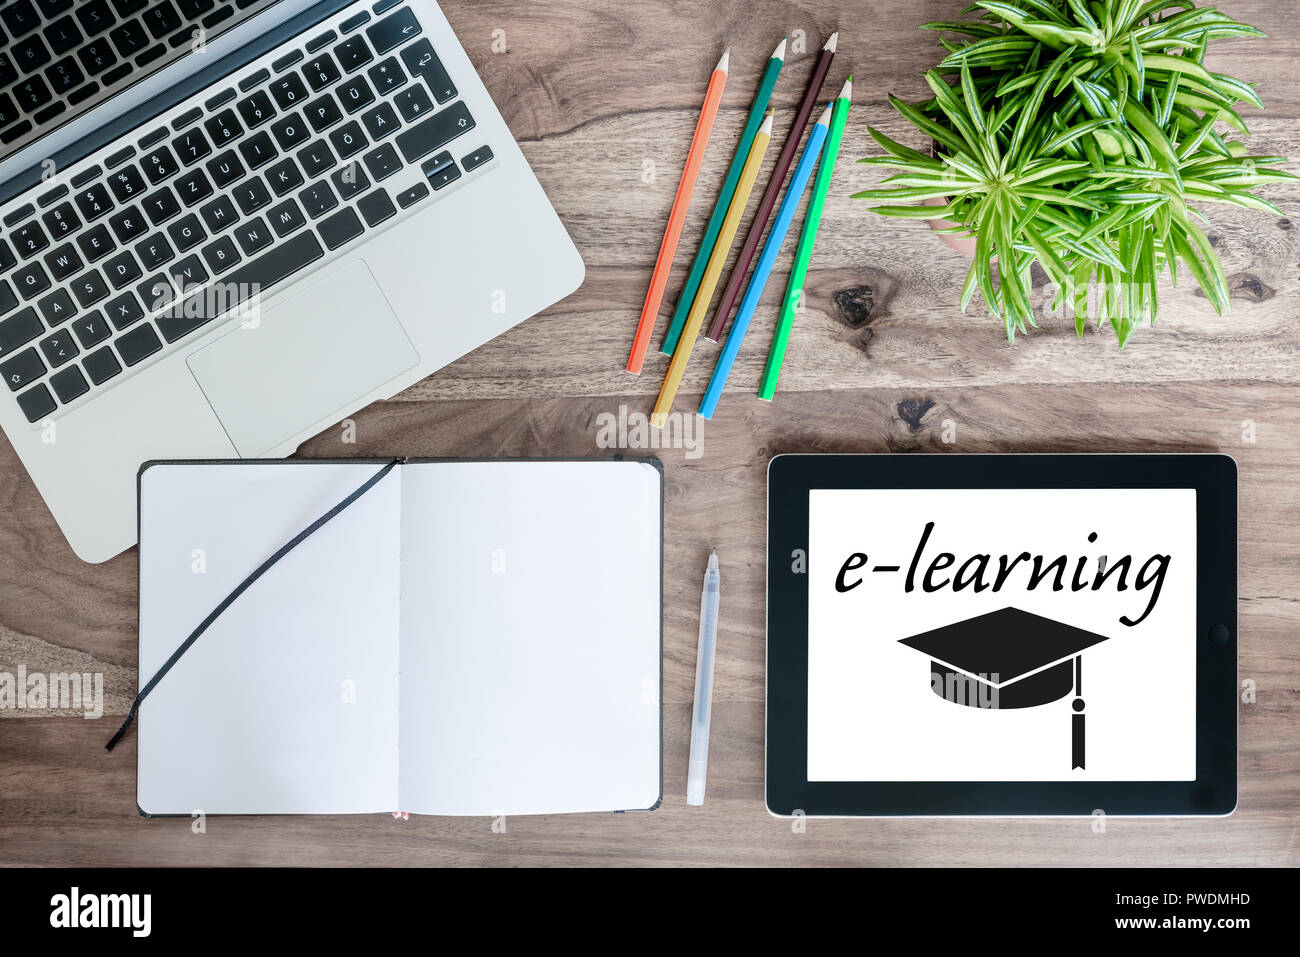 online education e-learning concept Stock Photo